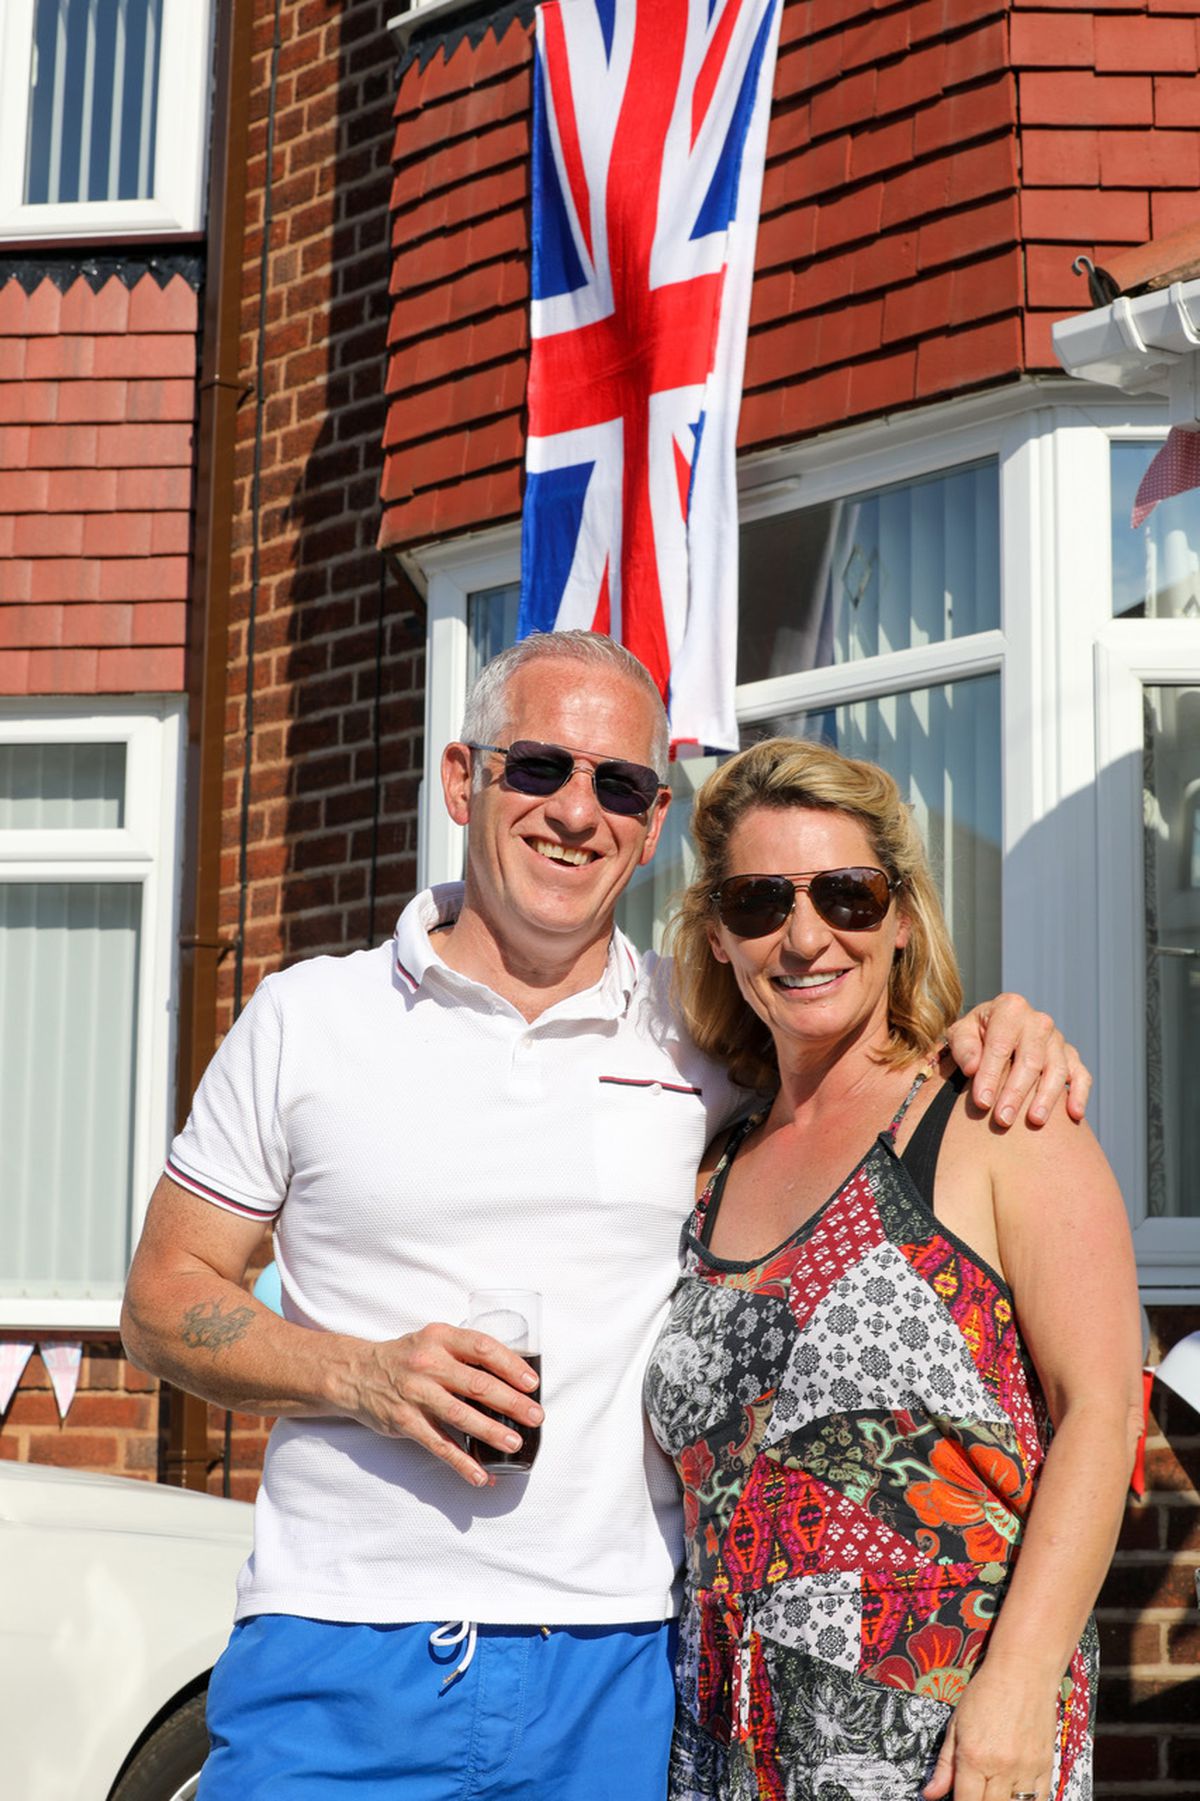 Celebrations in Shaftesbury Road, Wednesbury. Pic: Kennett Photography